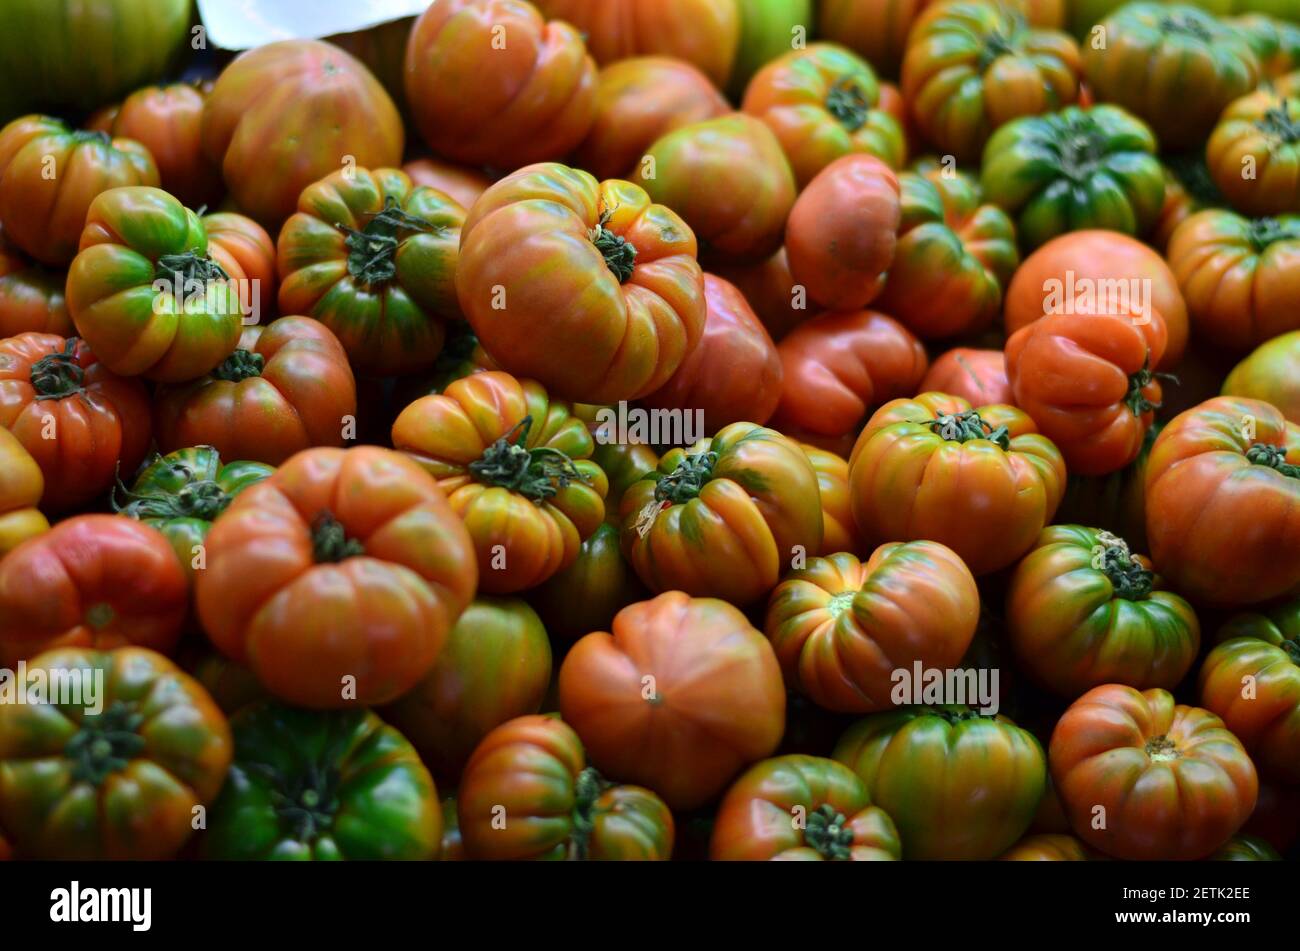 Fresh red and green tomatoes, freshly harvested from the garden, ready for sale at the vegetable market. Stock Photo